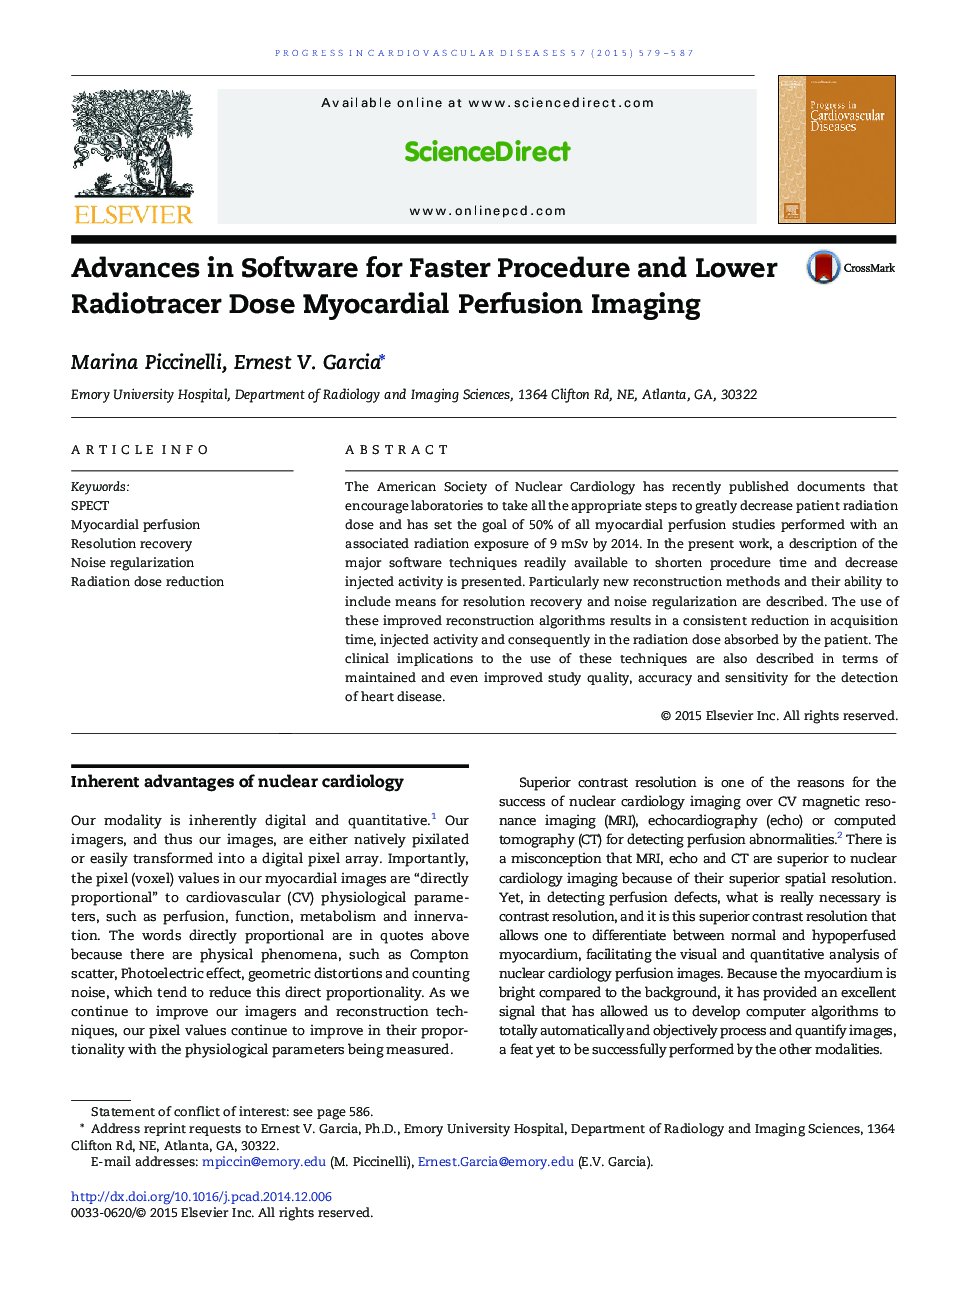 Advances in Software for Faster Procedure and Lower Radiotracer Dose Myocardial Perfusion Imaging 